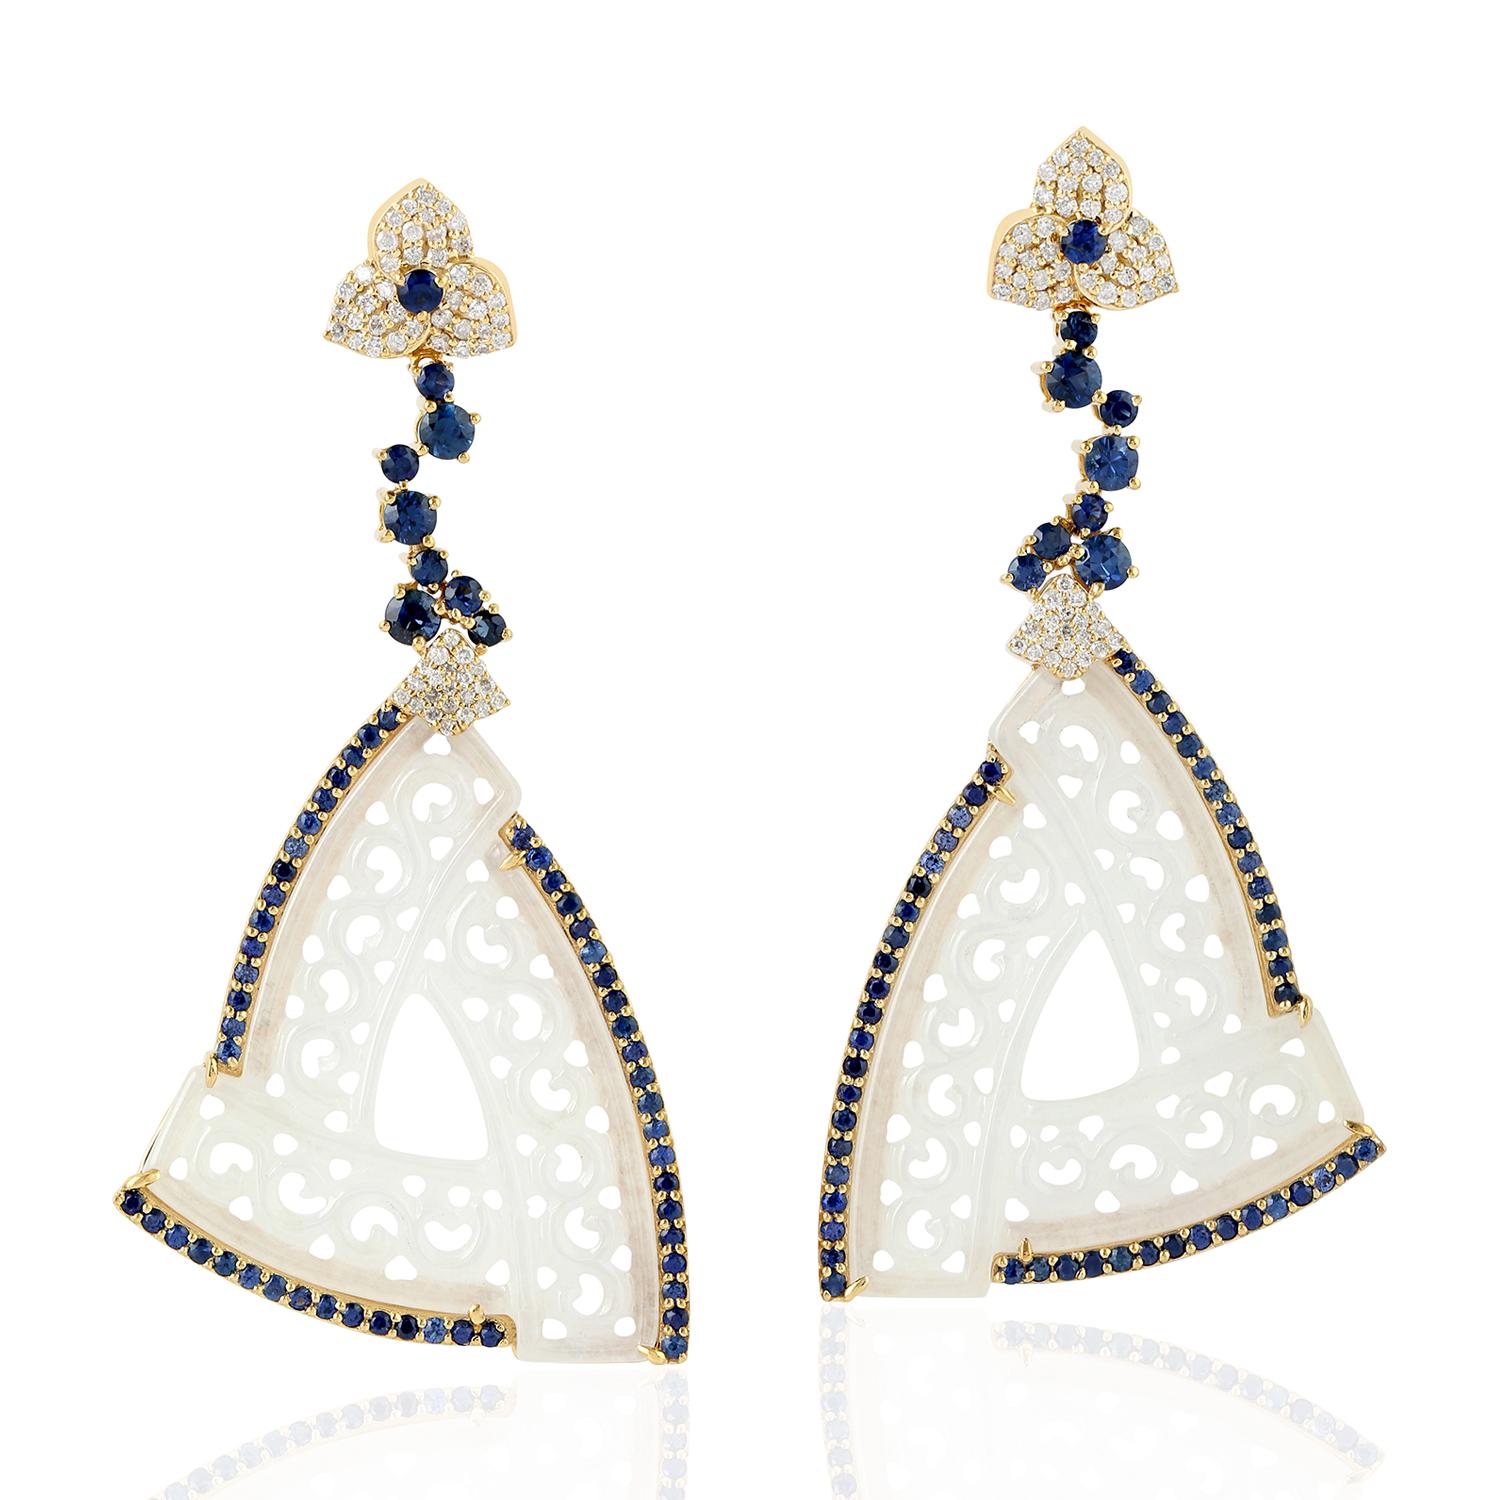 Mixed Cut Carved Trillion Shaped White Jade Dangle Earrings with Round Cut Blue Sapphire For Sale